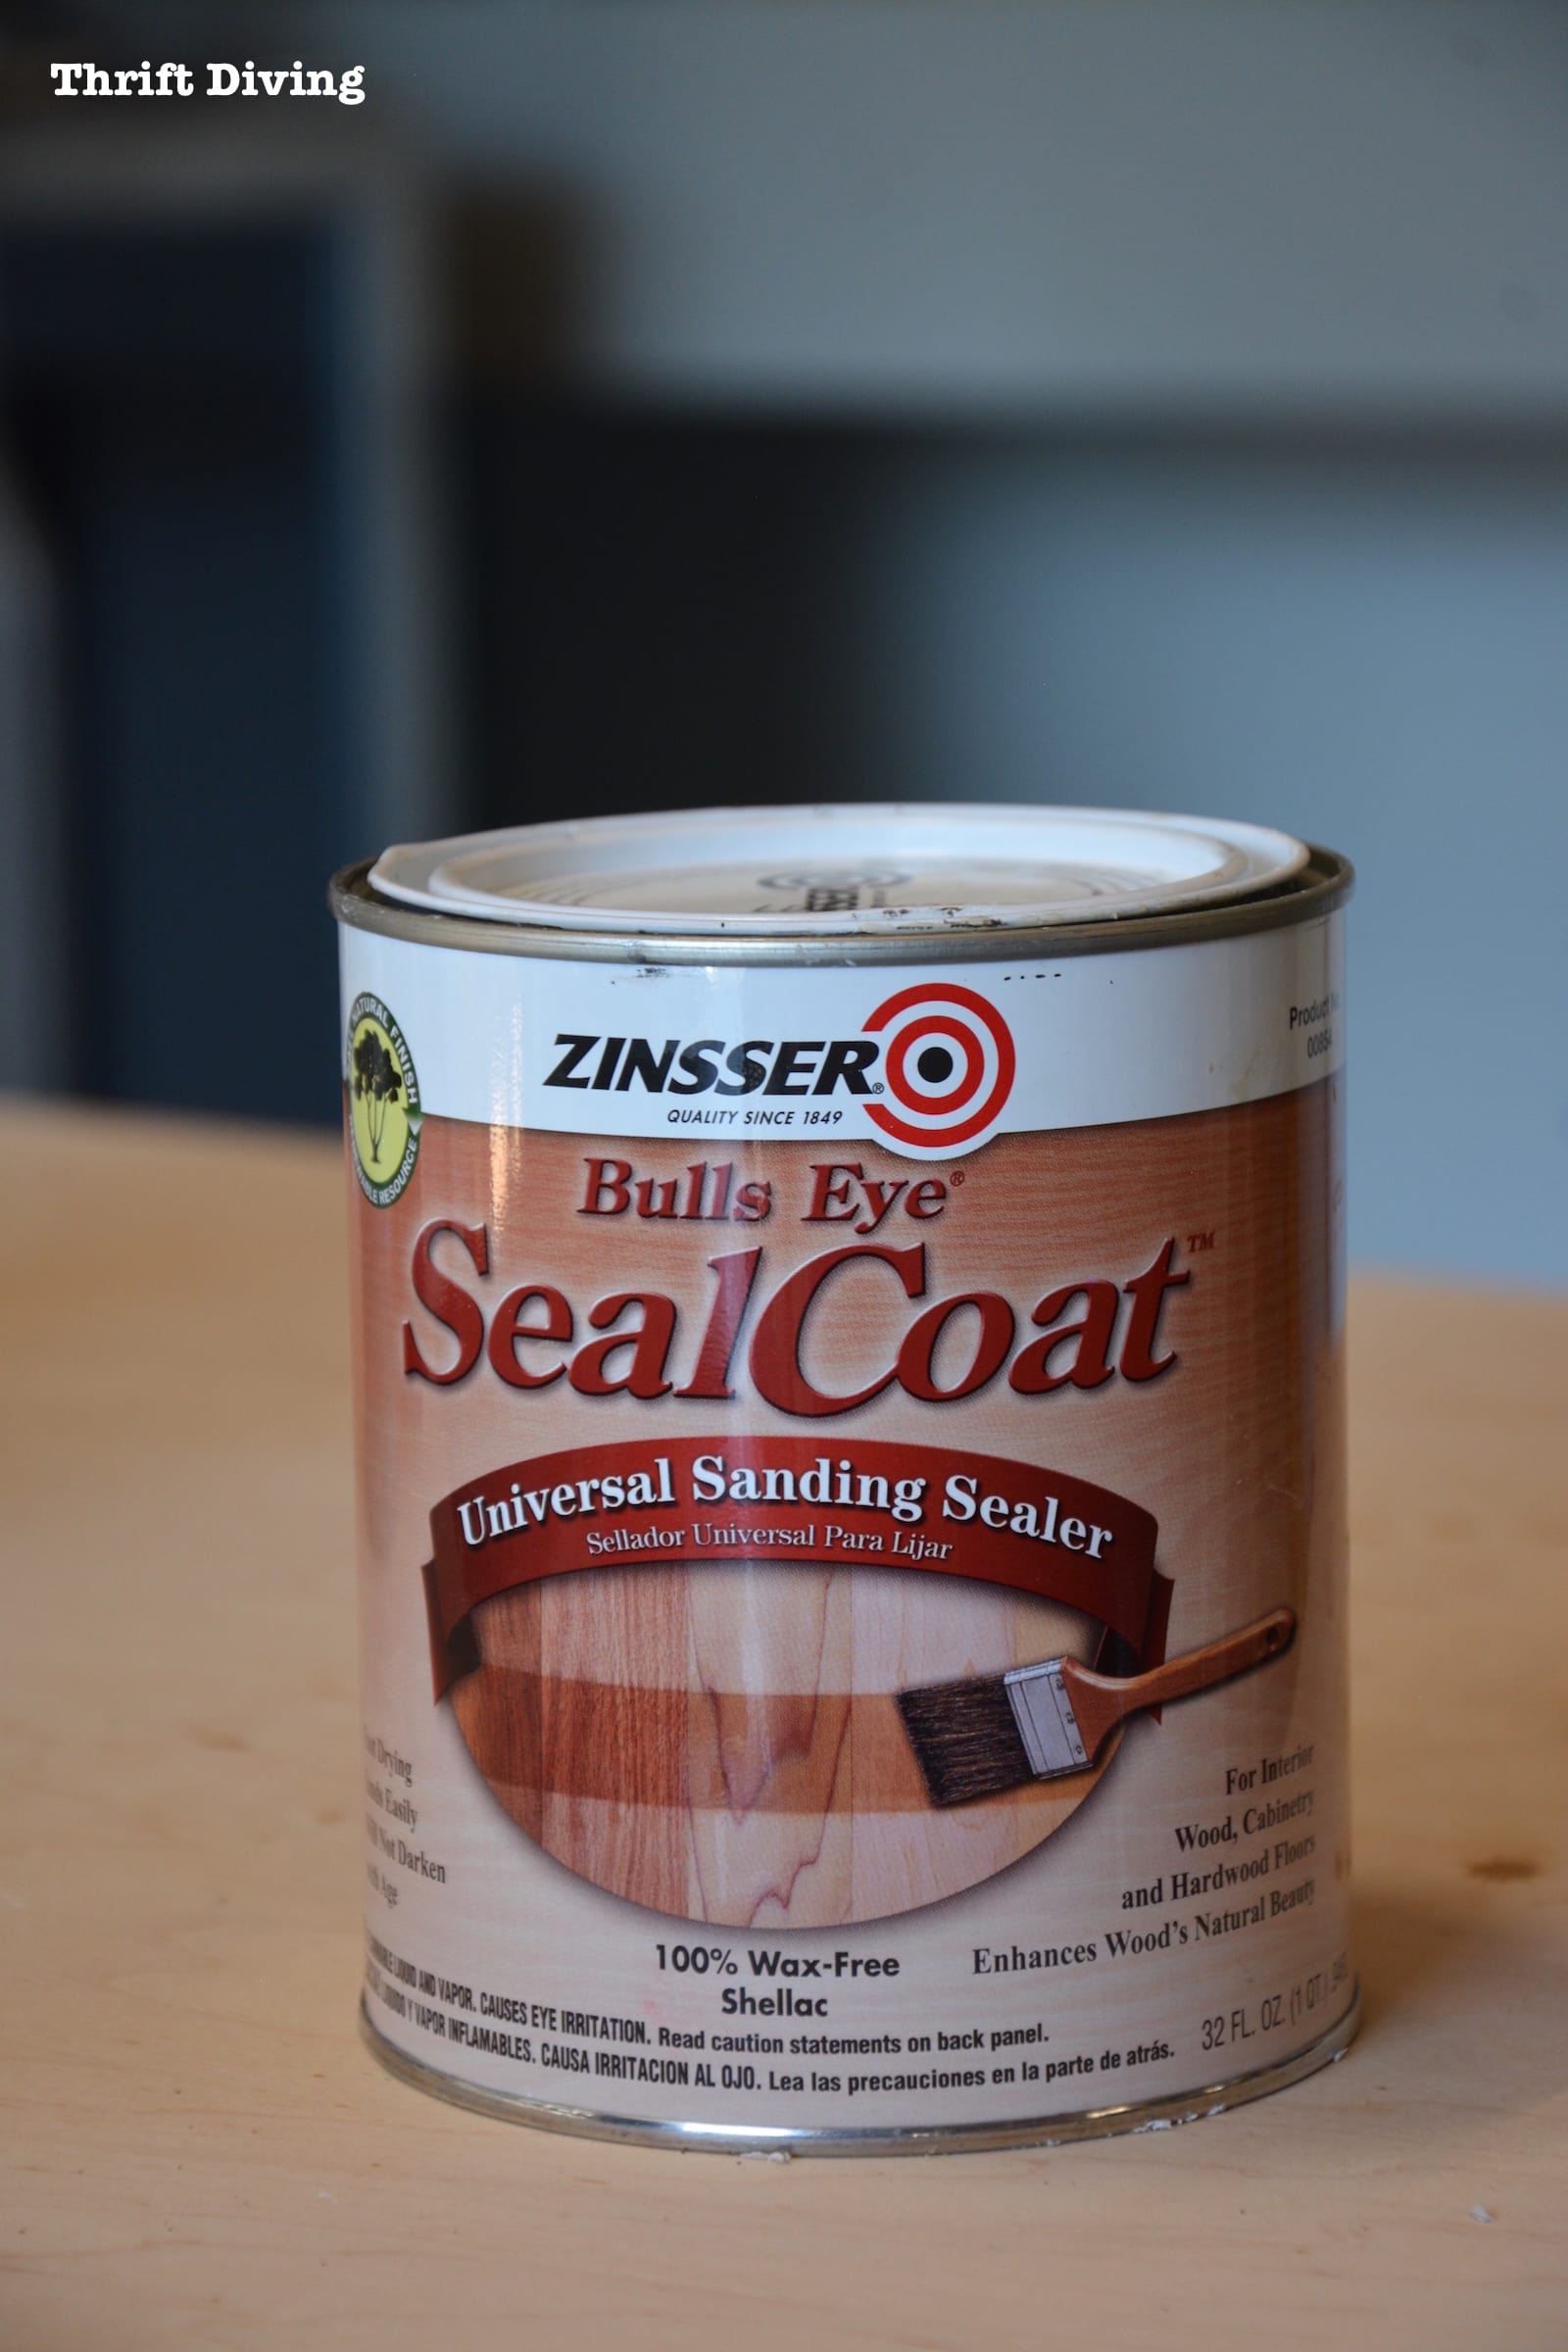 Dewaxed SealCoat sanding sealer helps seal in water-based wood dyes before adding a topcoat or waxing.